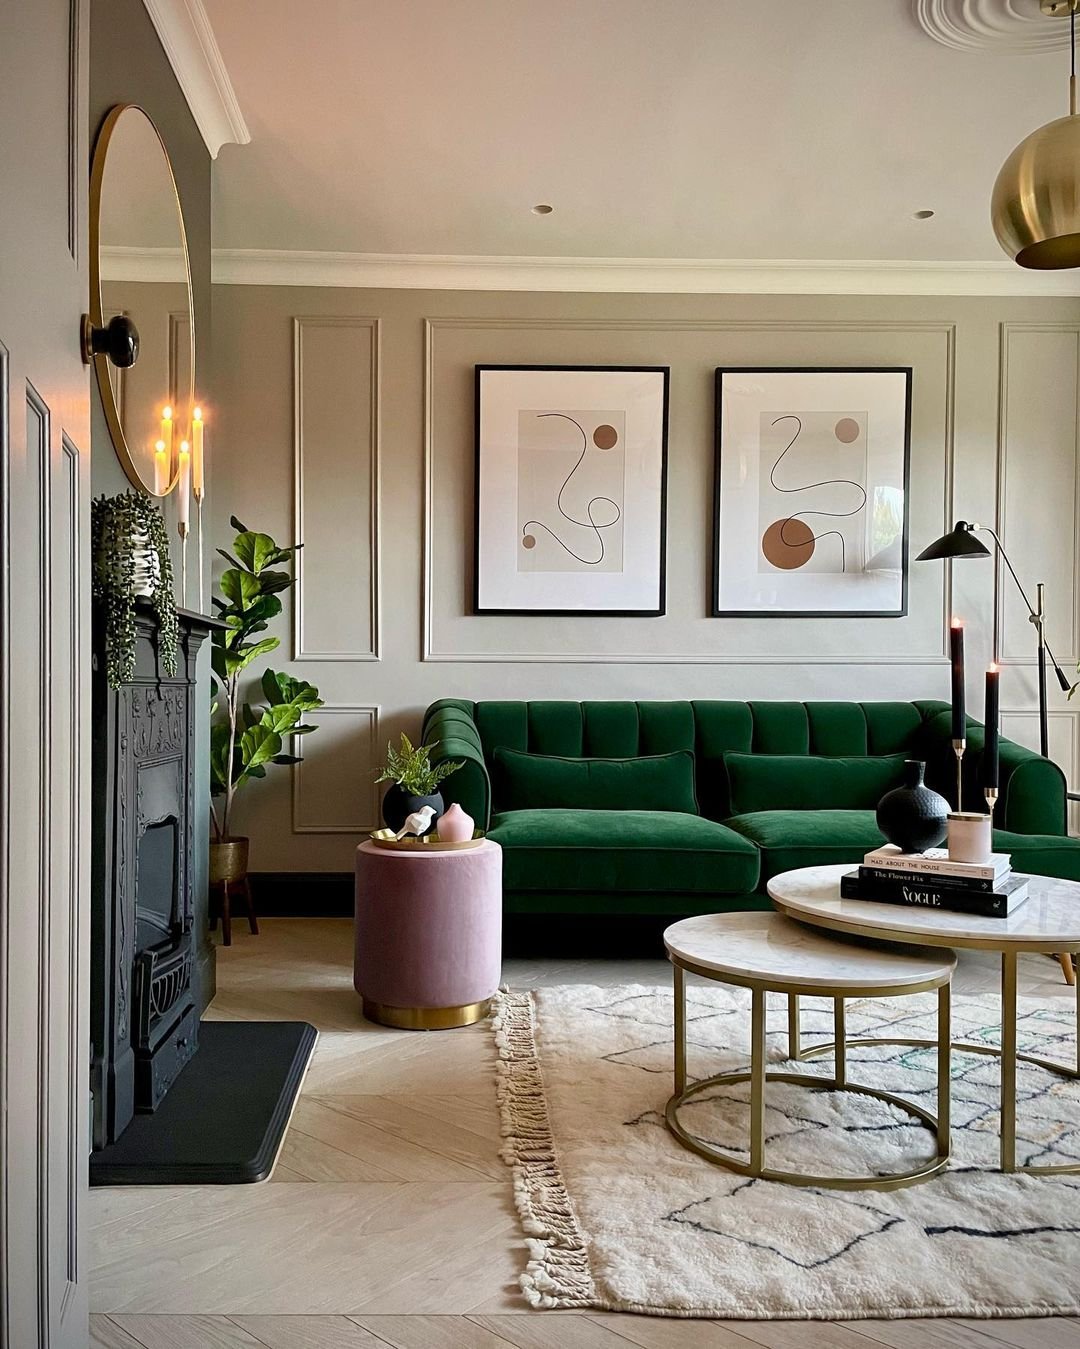 LIV Chats To…Interior Lover Gemma About Her Beautiful Modern Style ...